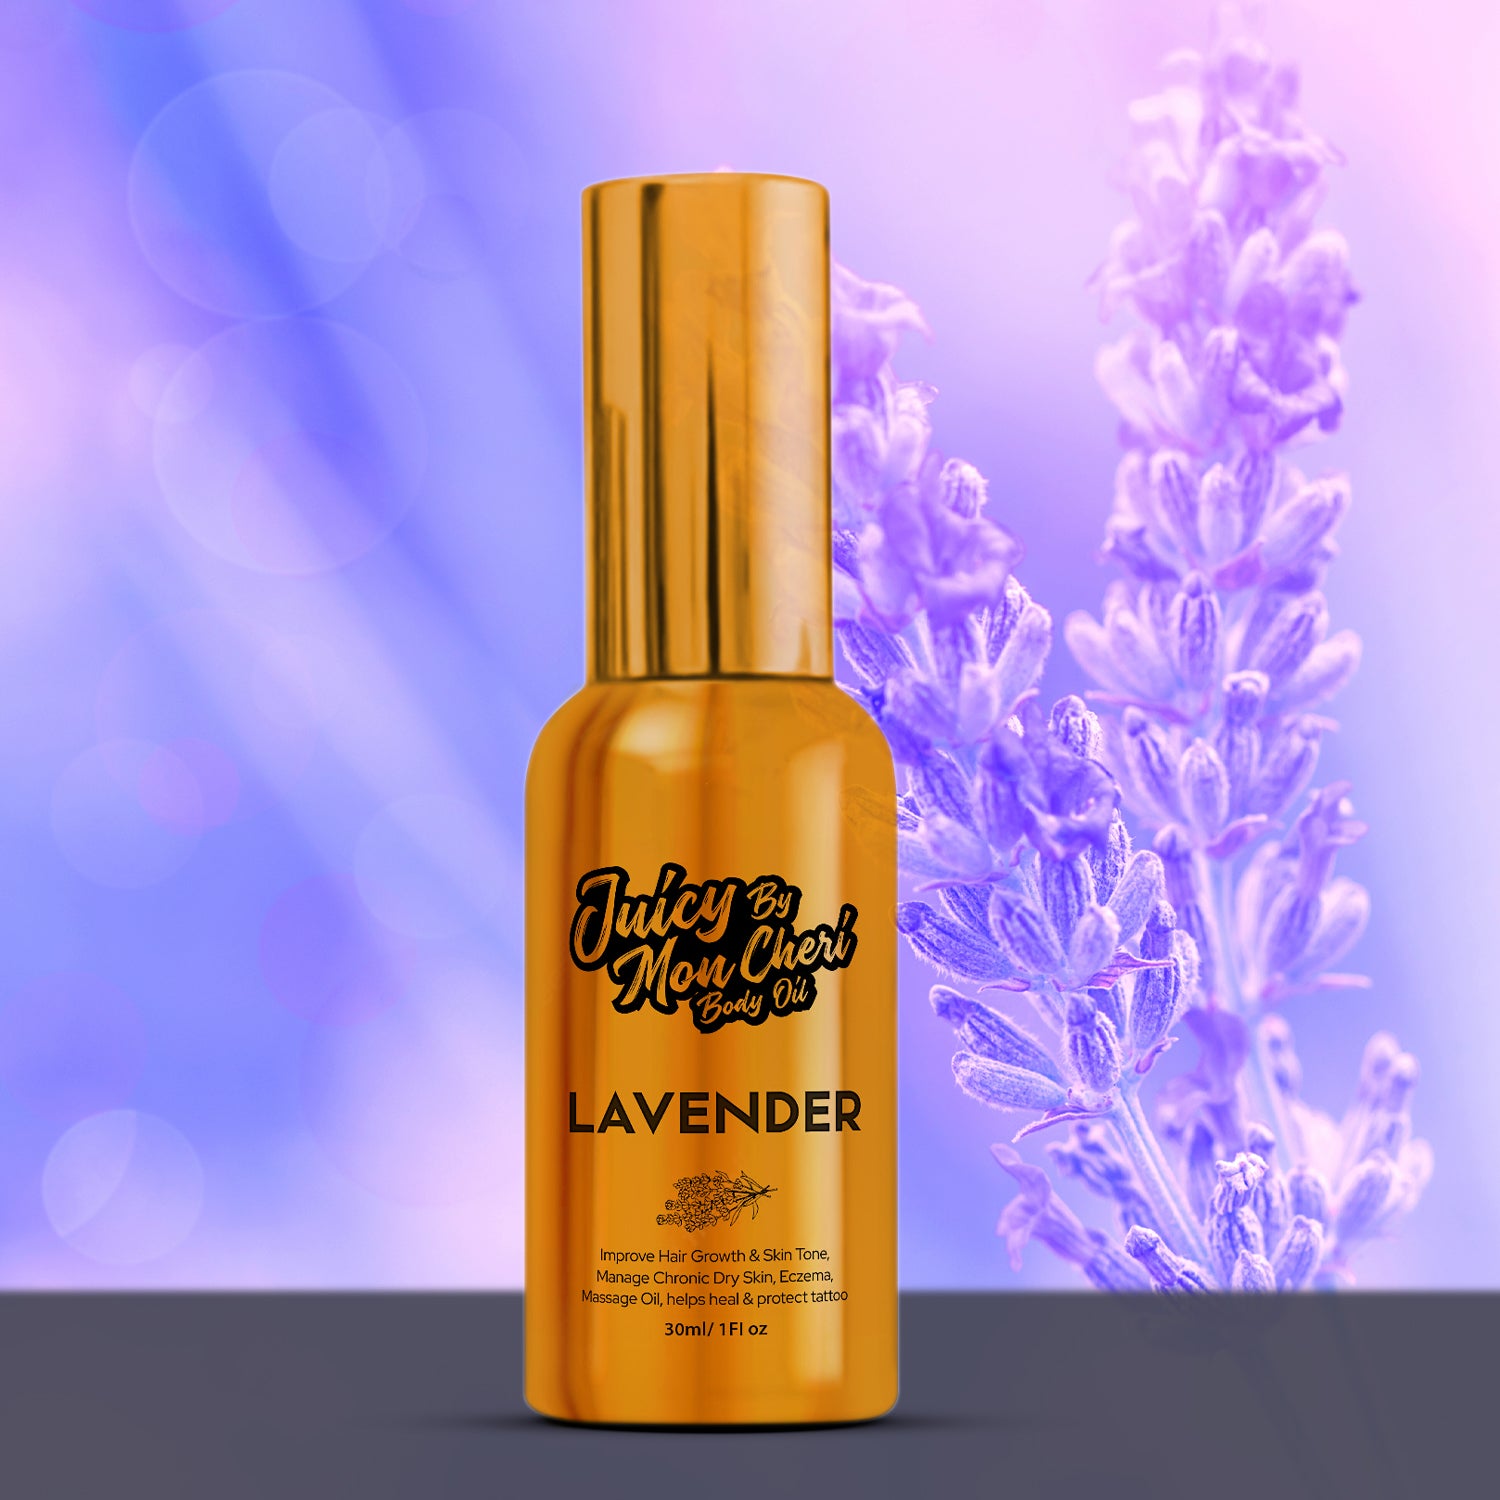 Luxurious Lavender Body Oil by Juicy By Mon Cheri